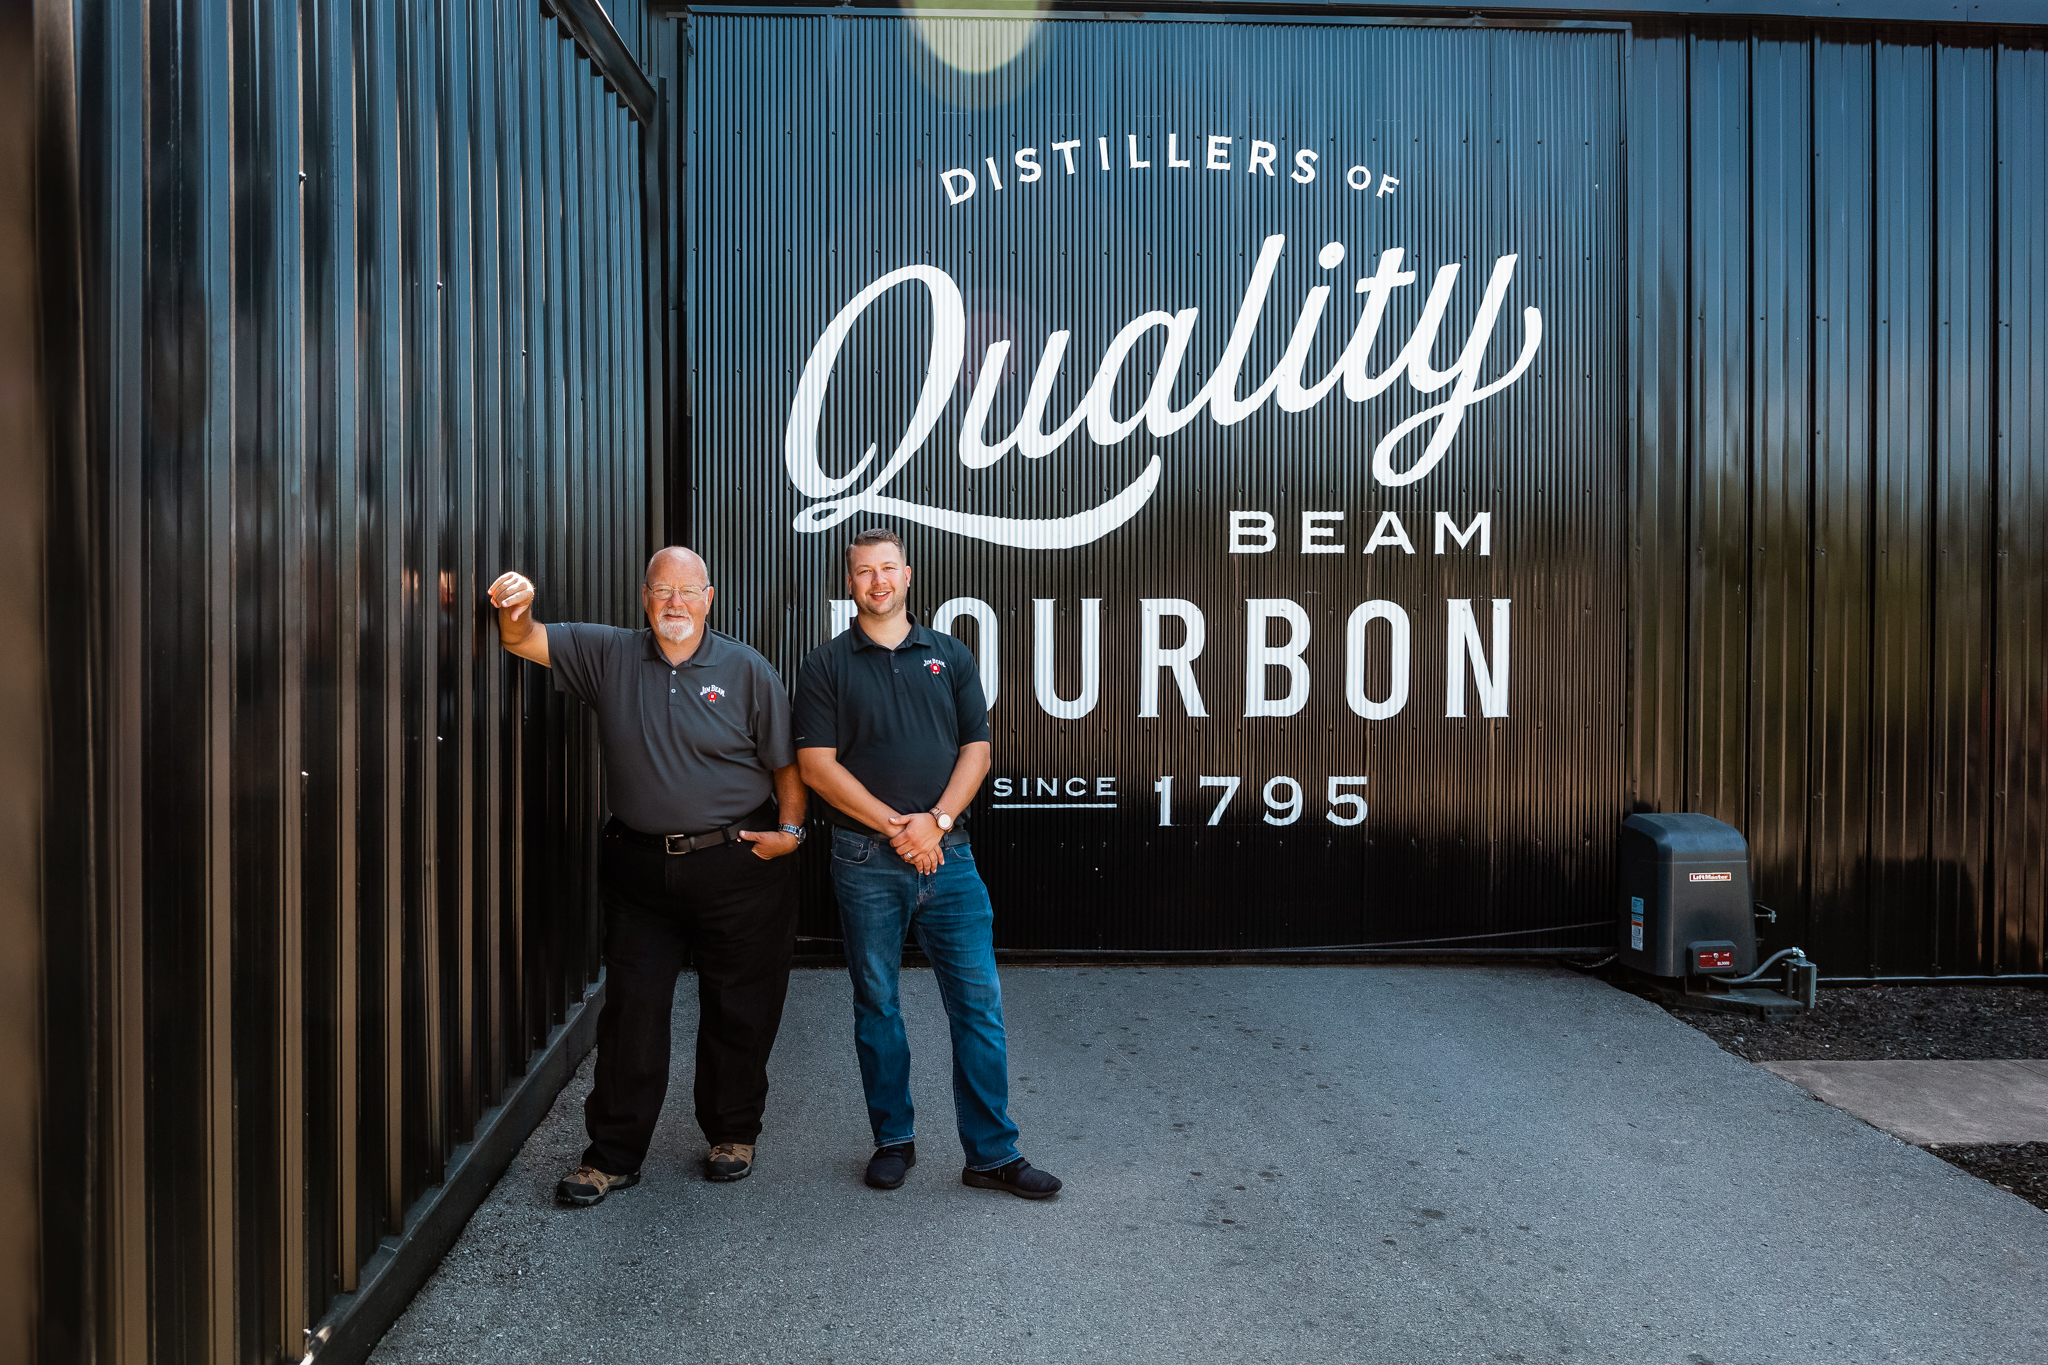 Behind The Beam With Freddie Noe - New Bourbon distillery tour in Kentucky